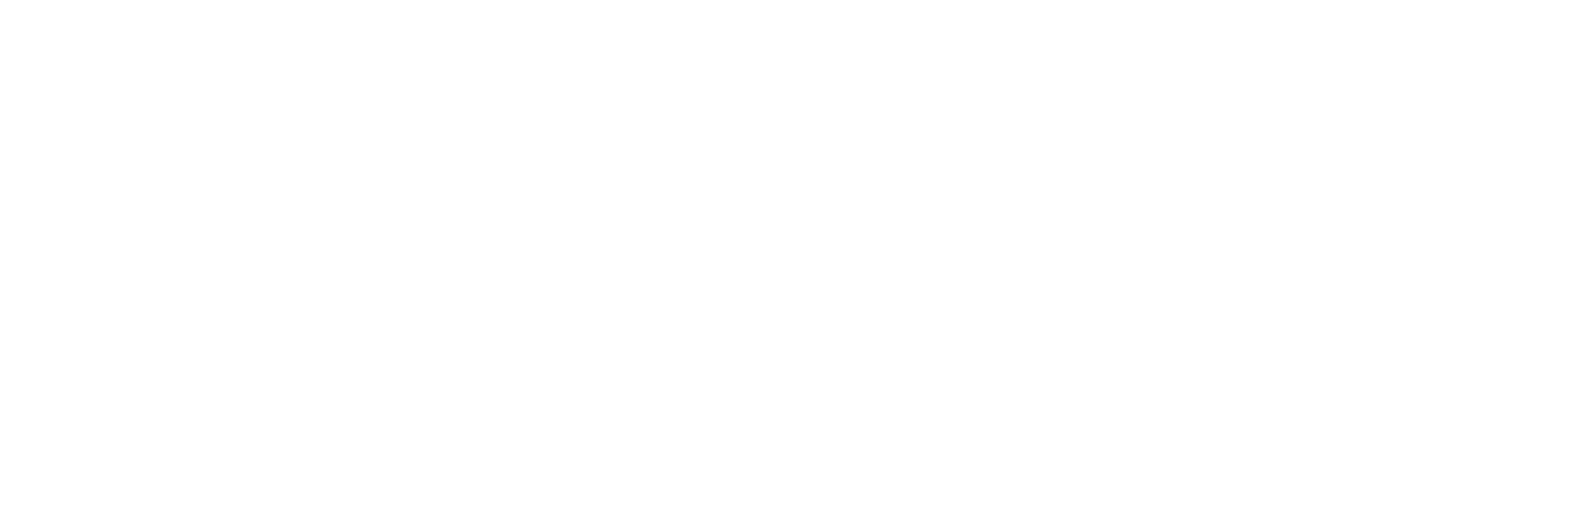 THG (The Hut Group) logo for dark backgrounds (transparent PNG)